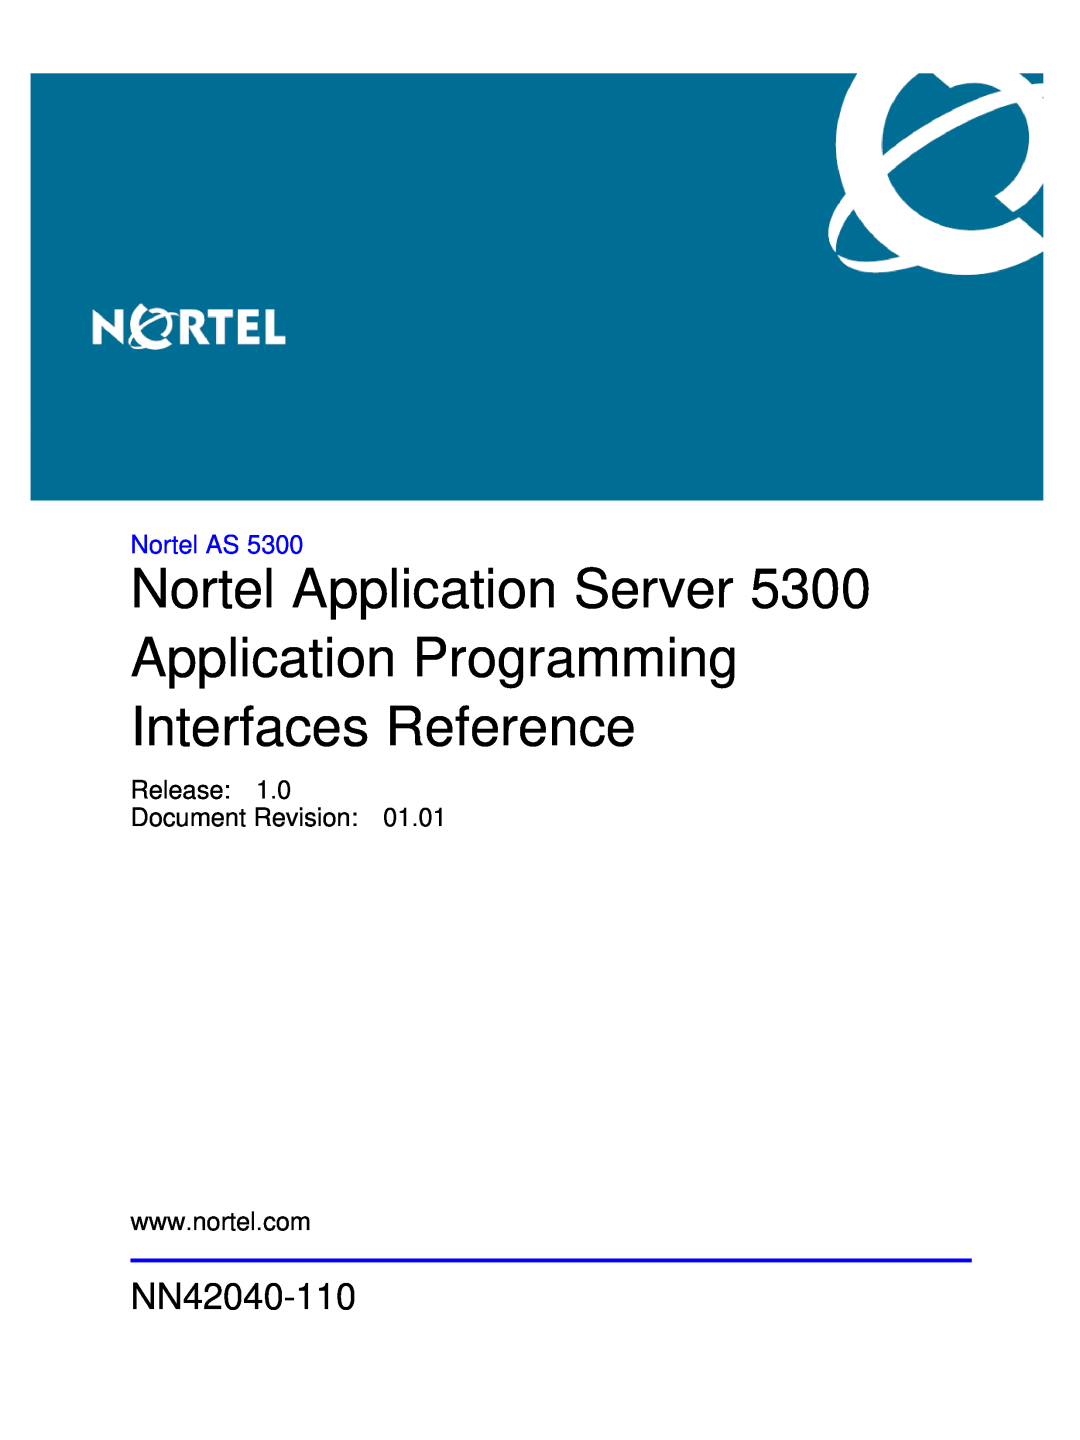 Nortel Networks AS 5300 manual Nortel Application Server Application Programming, Interfaces Reference, NN42040-110 